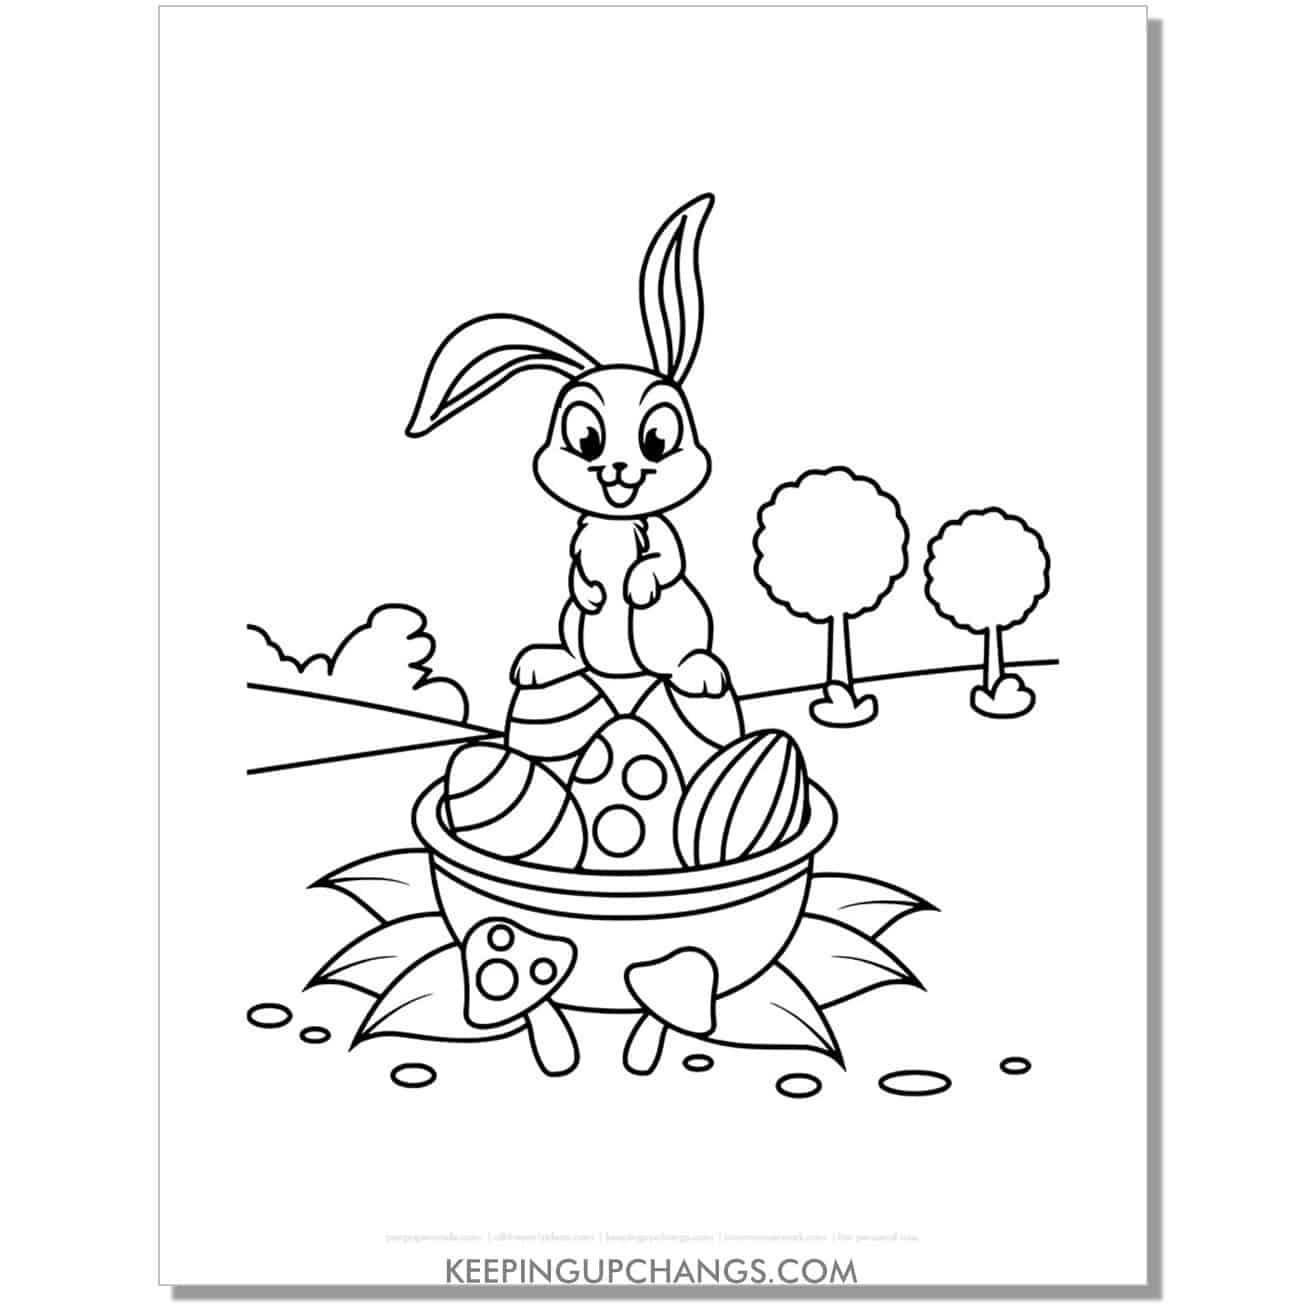 cute easter bunny sitting on basket of eggs coloring page, sheet.